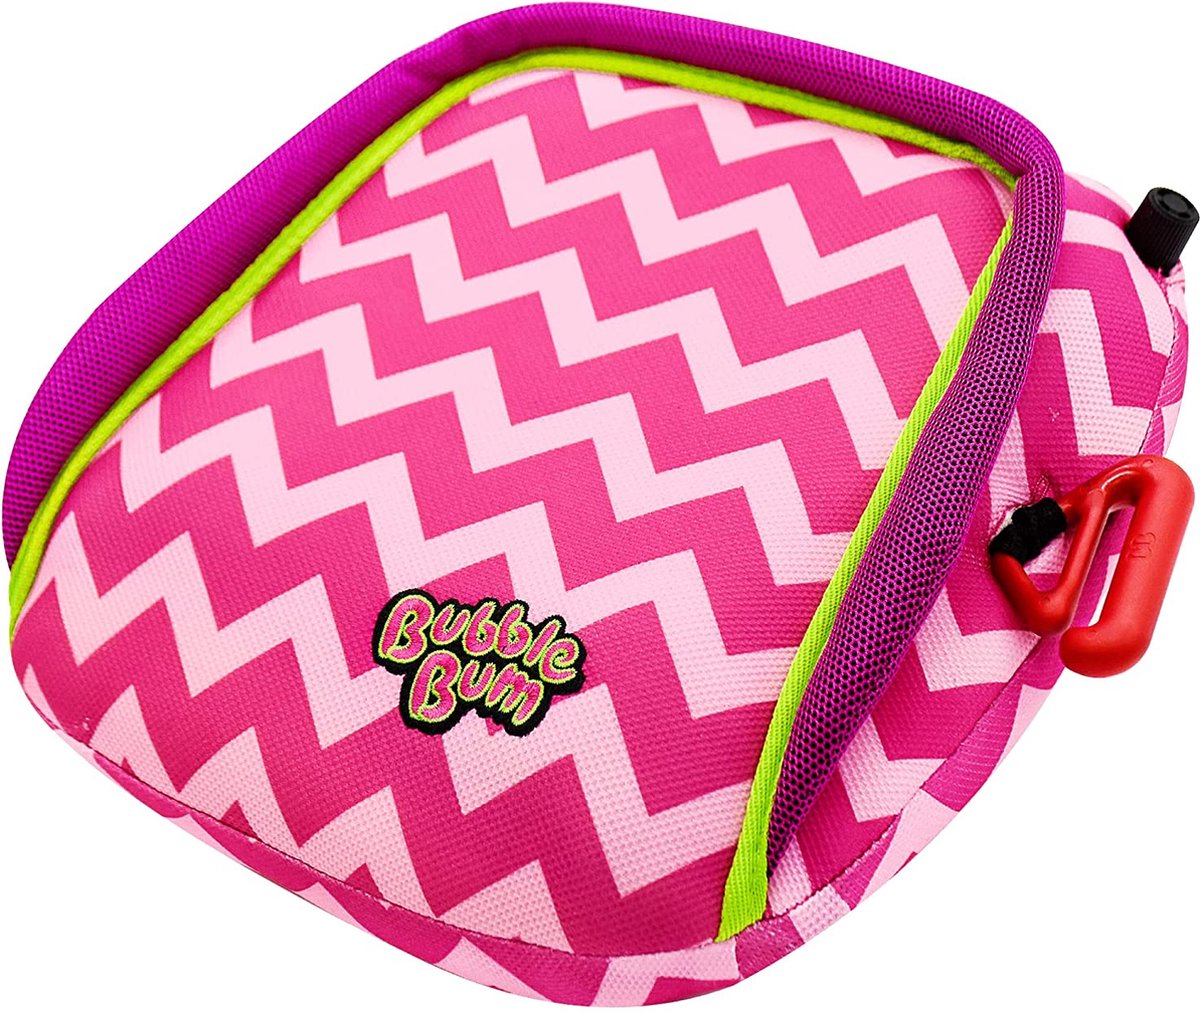 BubbleBum - Inflatable Child's Safety Booster Seat - Raspberry - Bubblebum